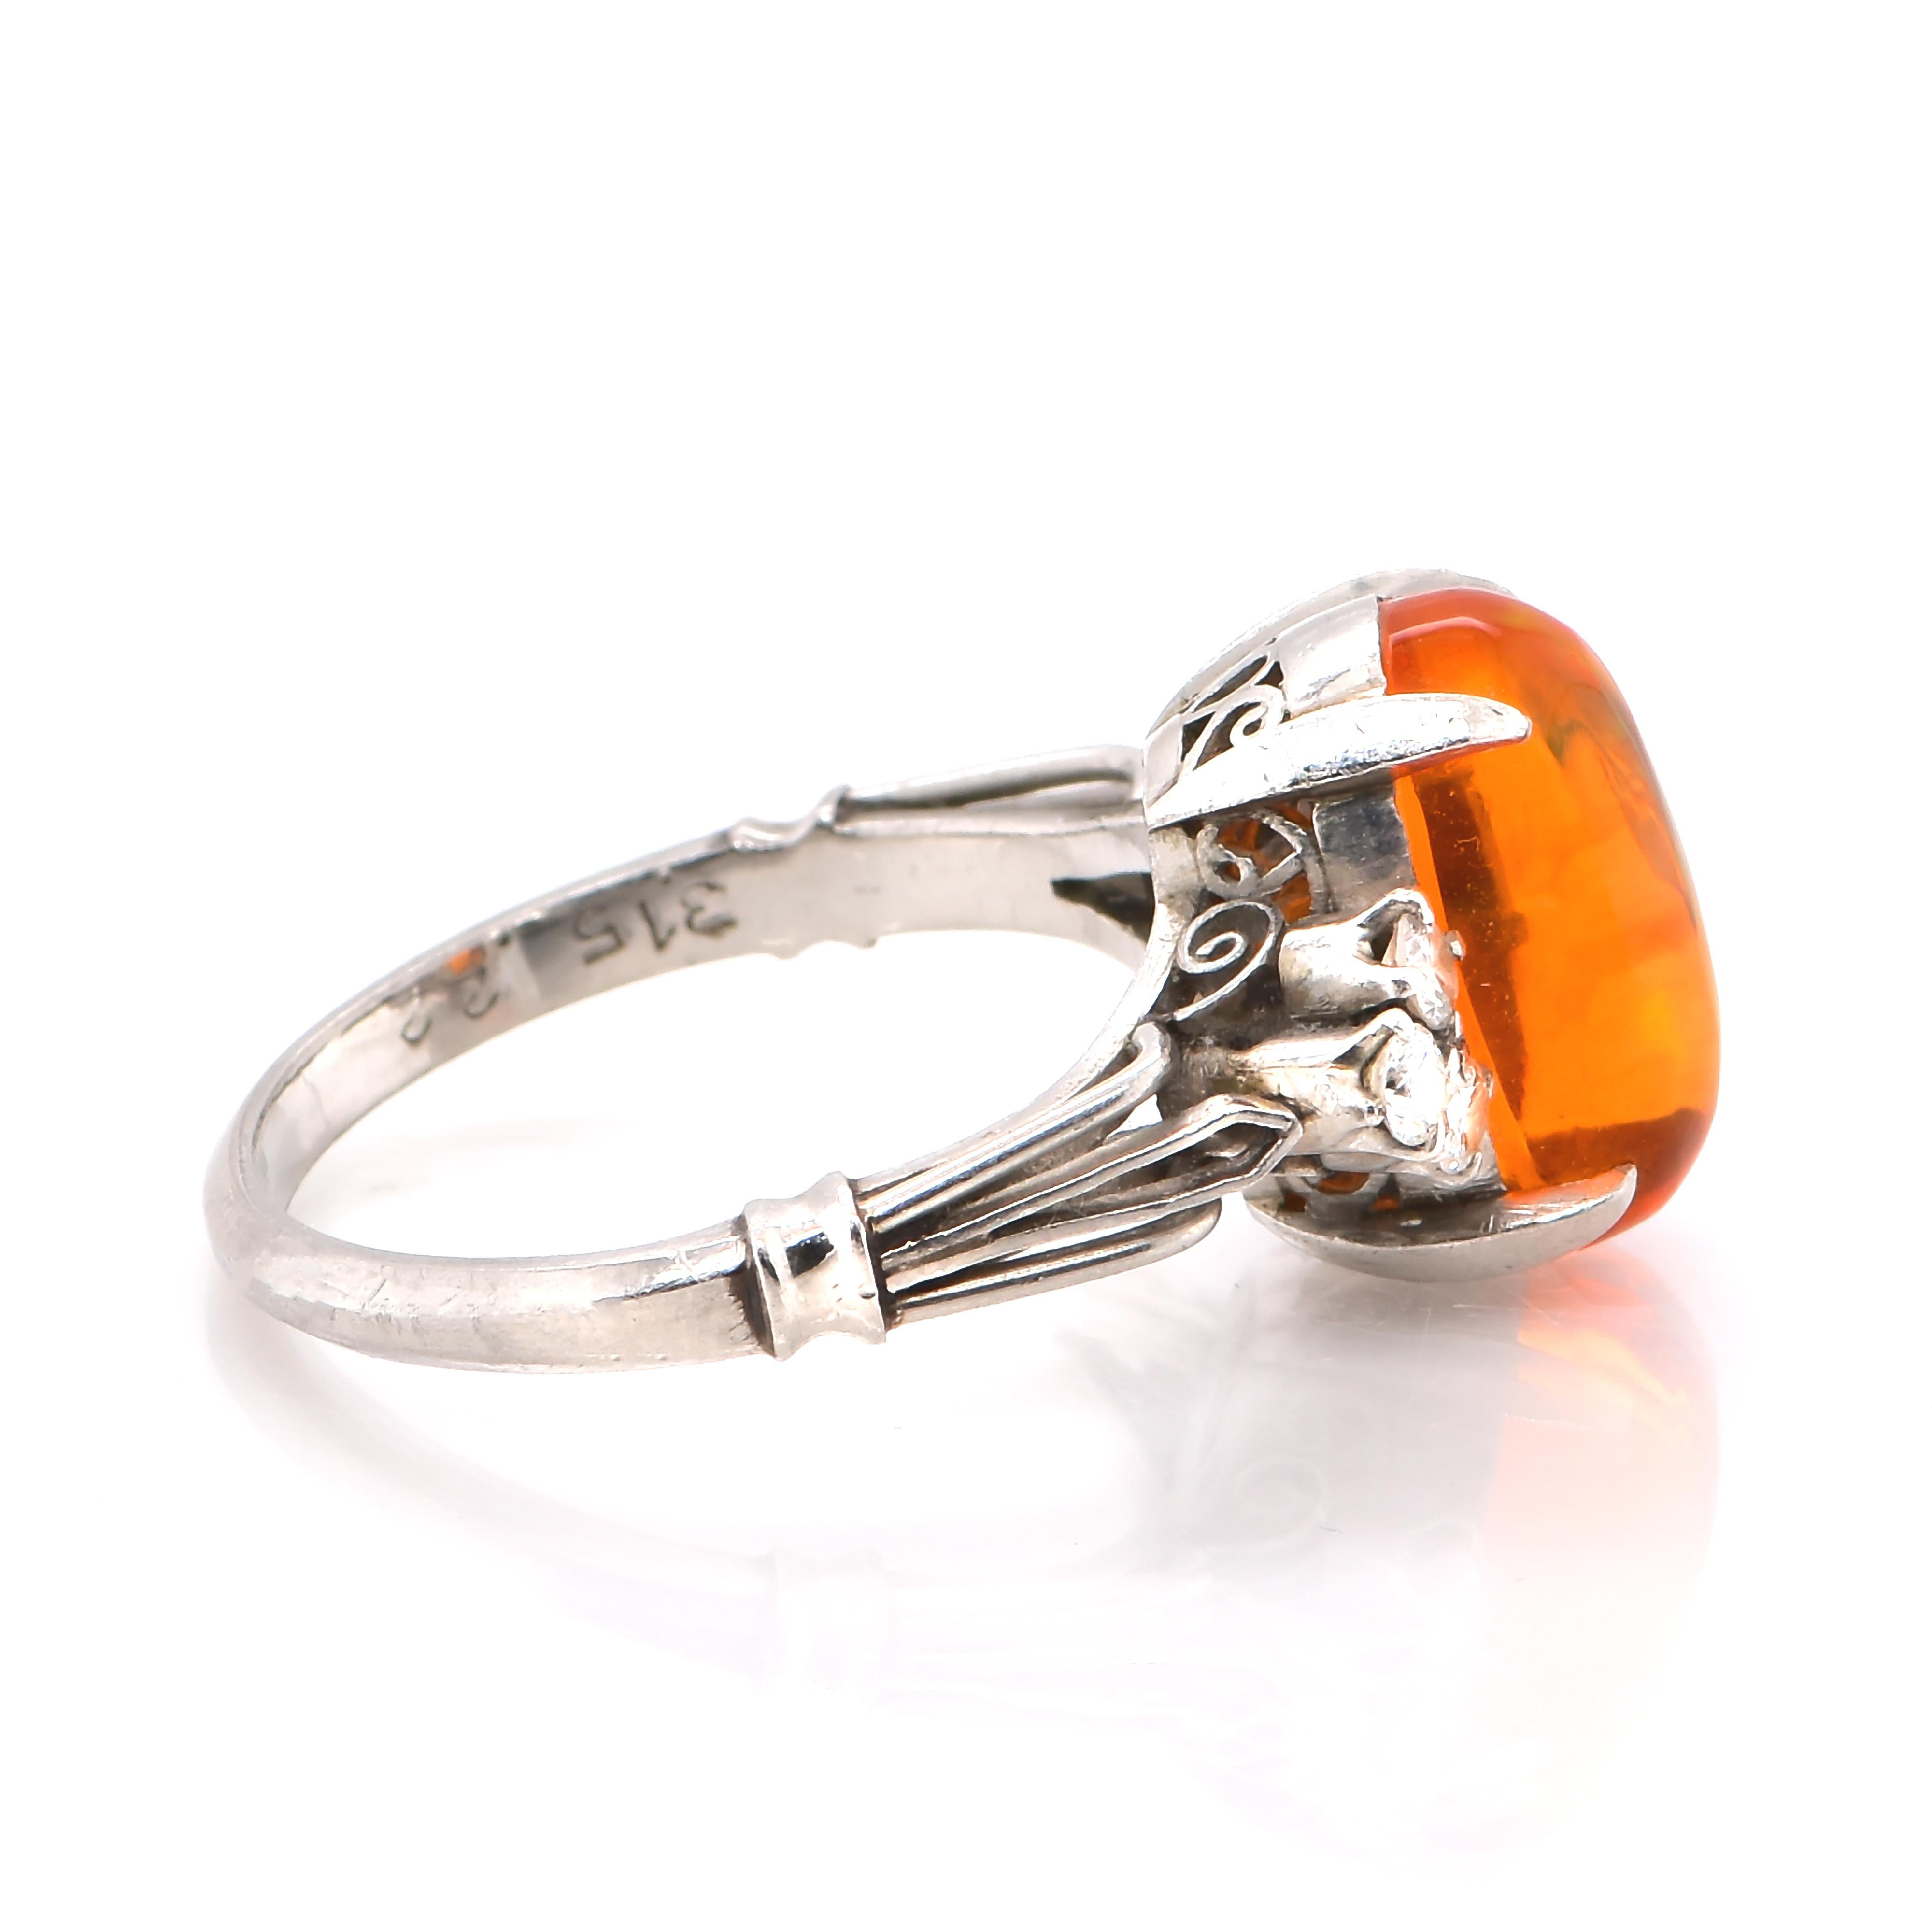 Cabochon 3.15 Carat Natural Mexican Fire Opal and Diamond Estate Ring Made in Platinum For Sale